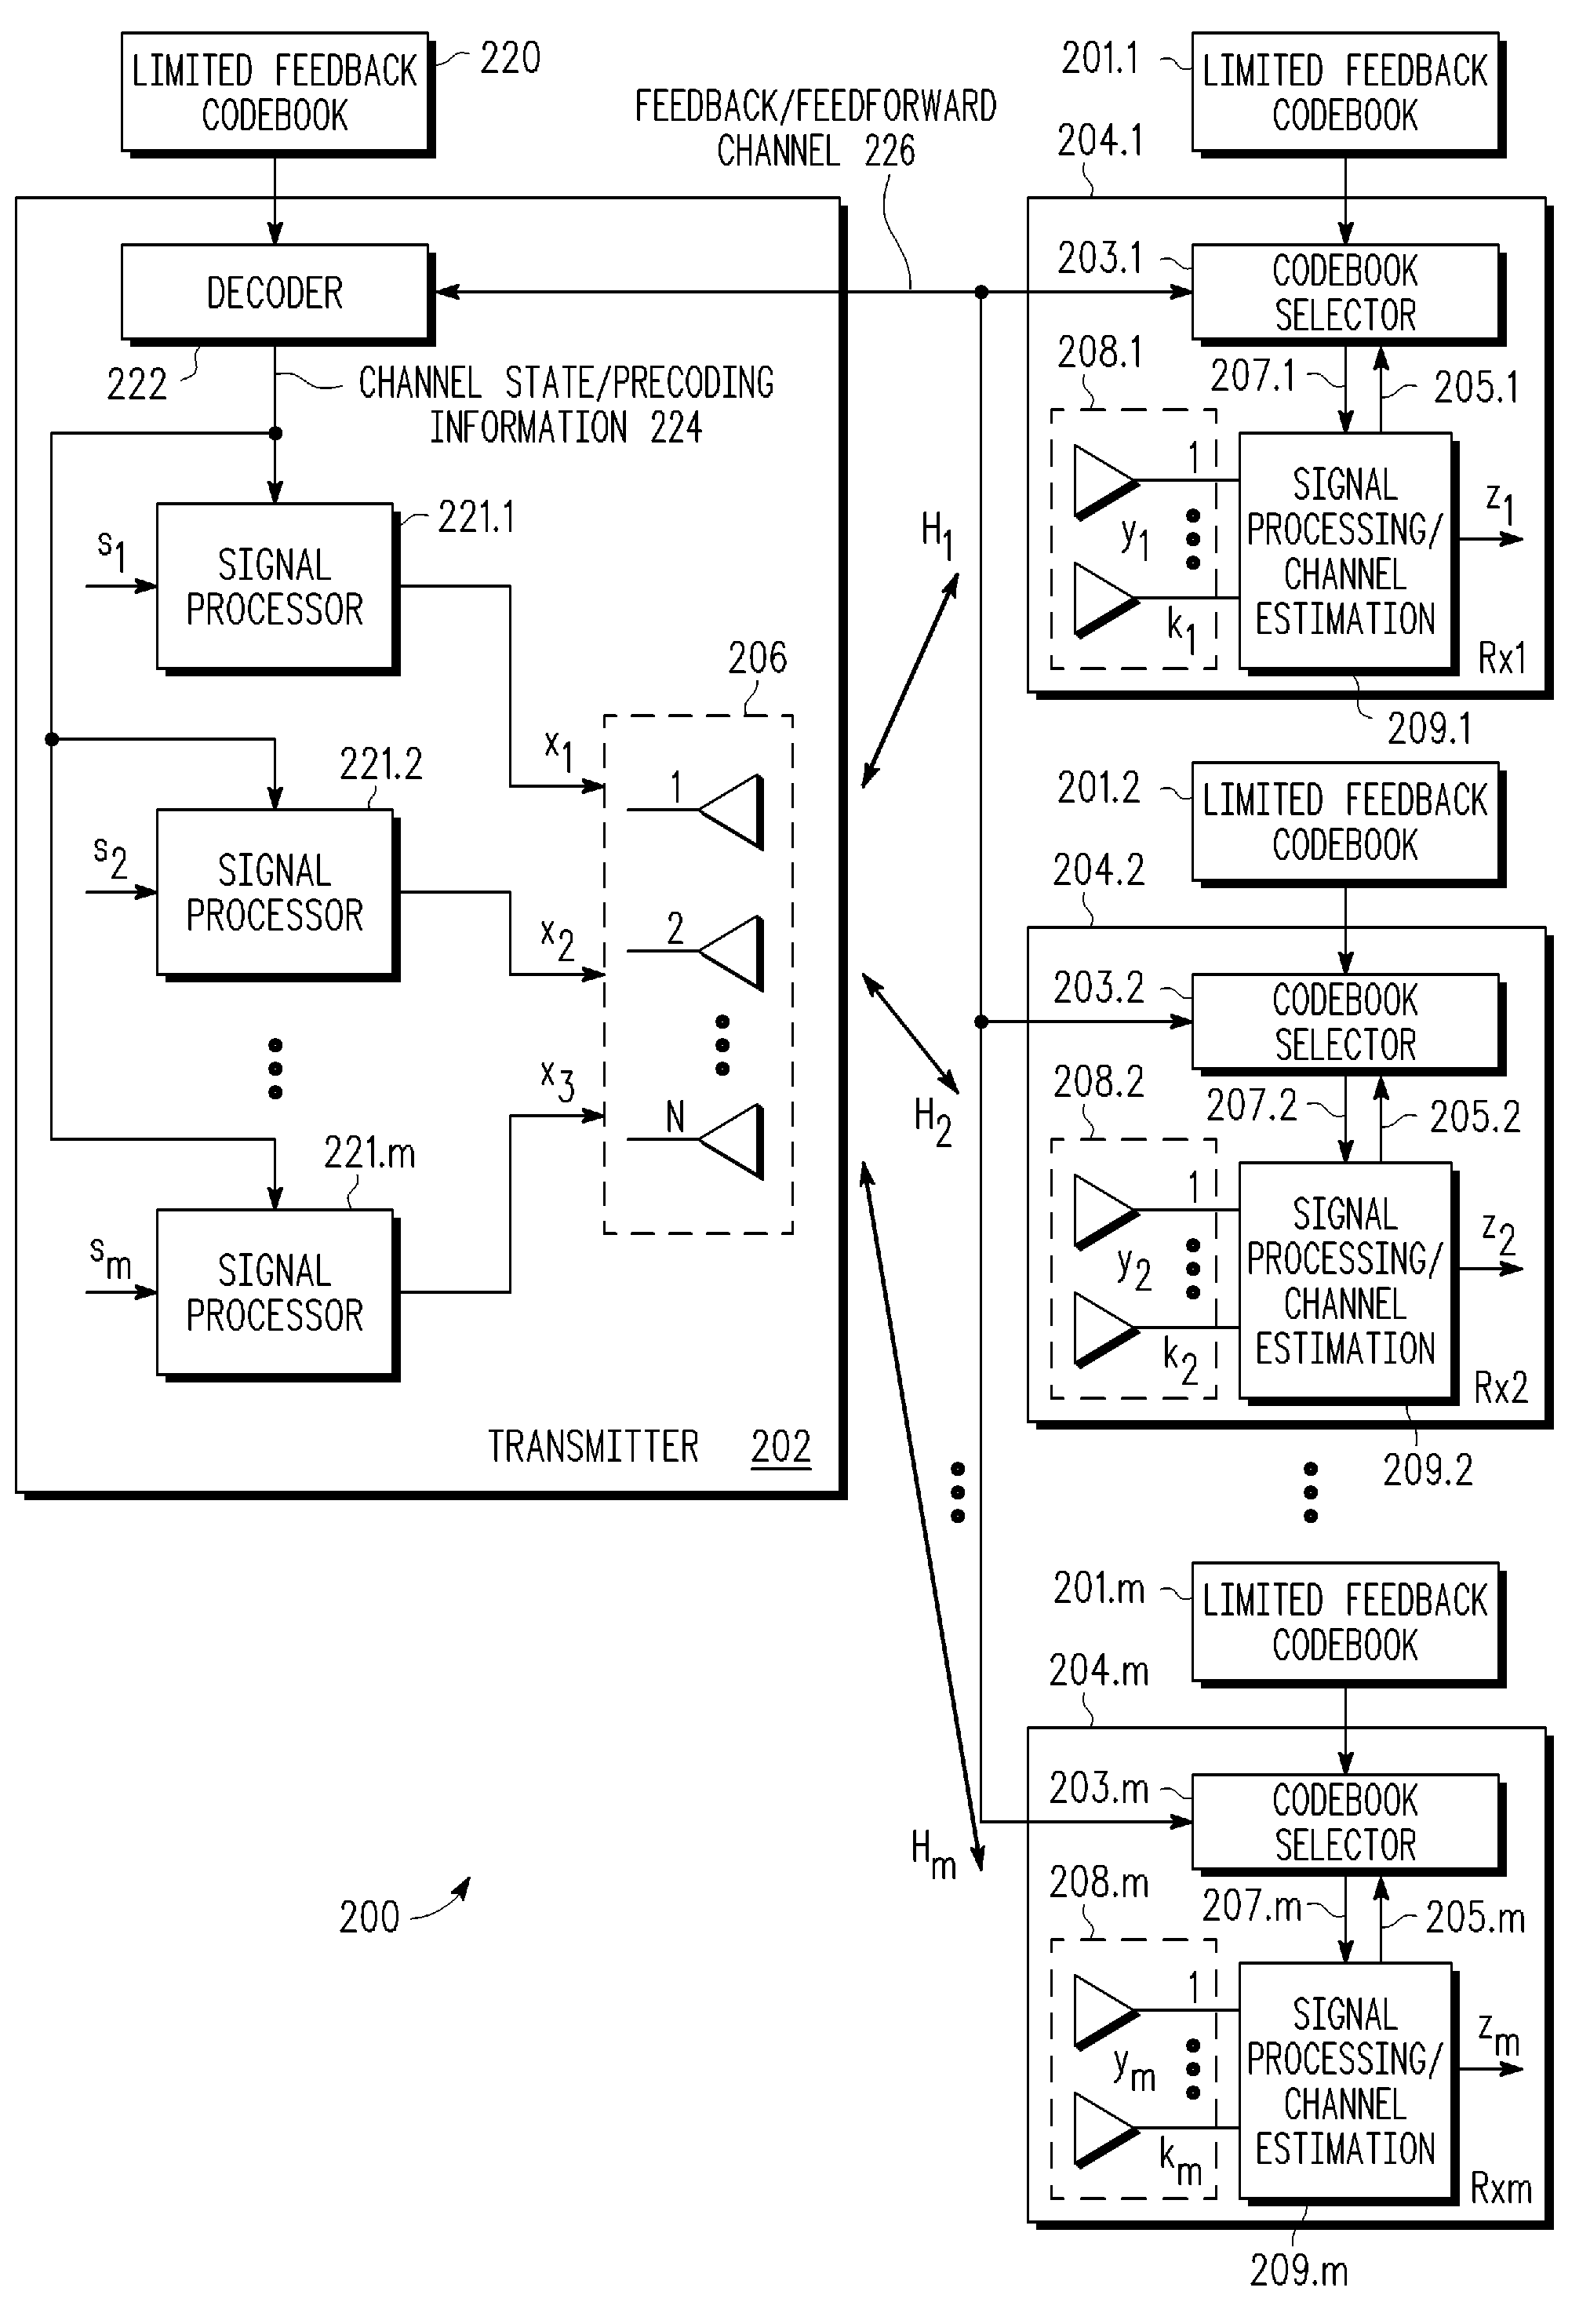 MIMO precoding enabling spatial multiplexing, power allocation and adaptive modulation and coding